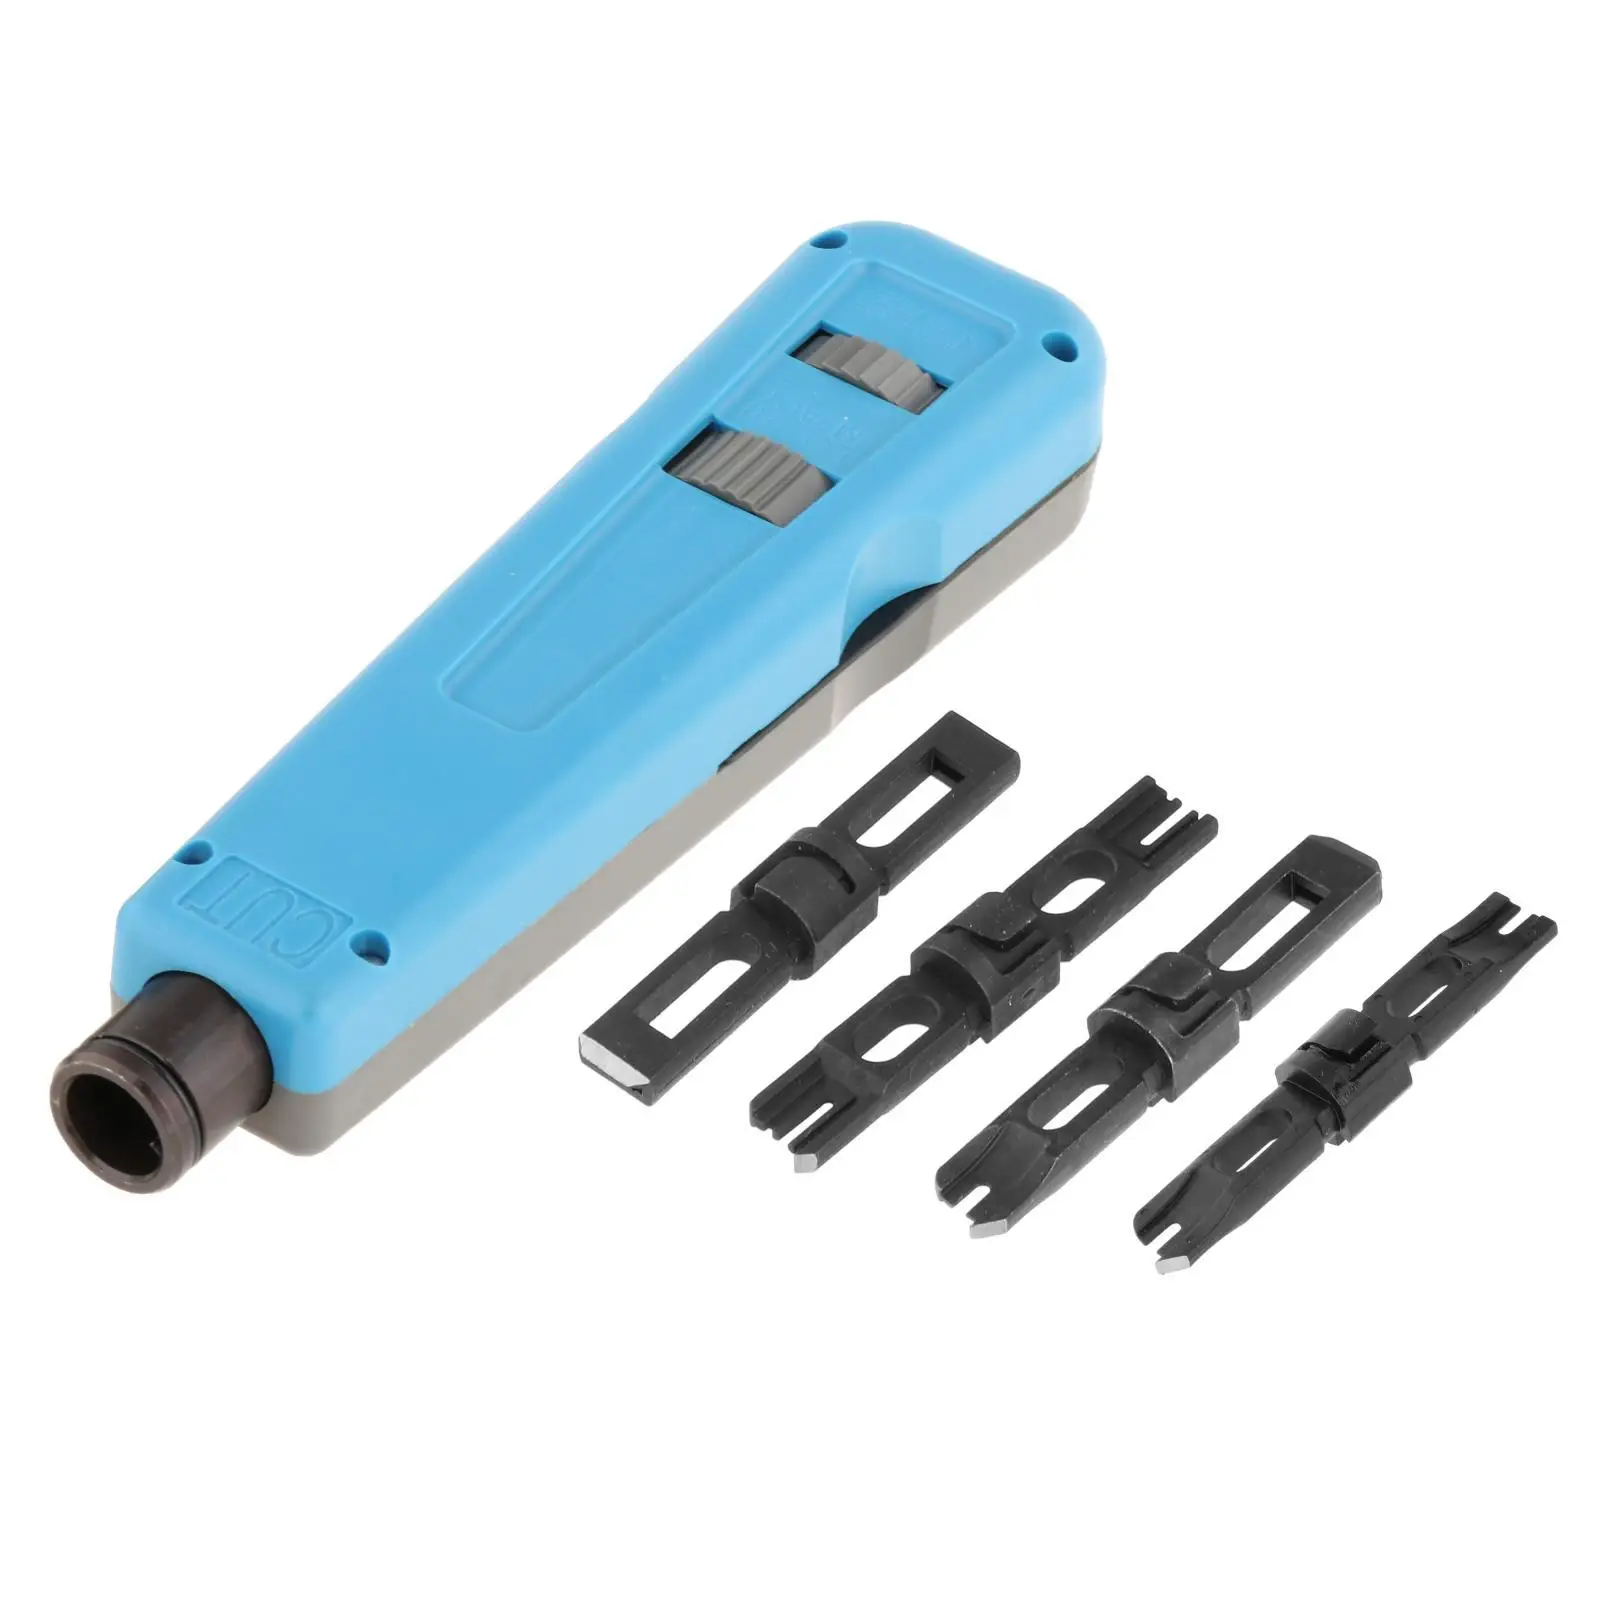 Punch Down Tool with 110/66 110/88 Blade Professional Universal Impact Terminal Insertion Tools Multi Function for LAN Ethernet